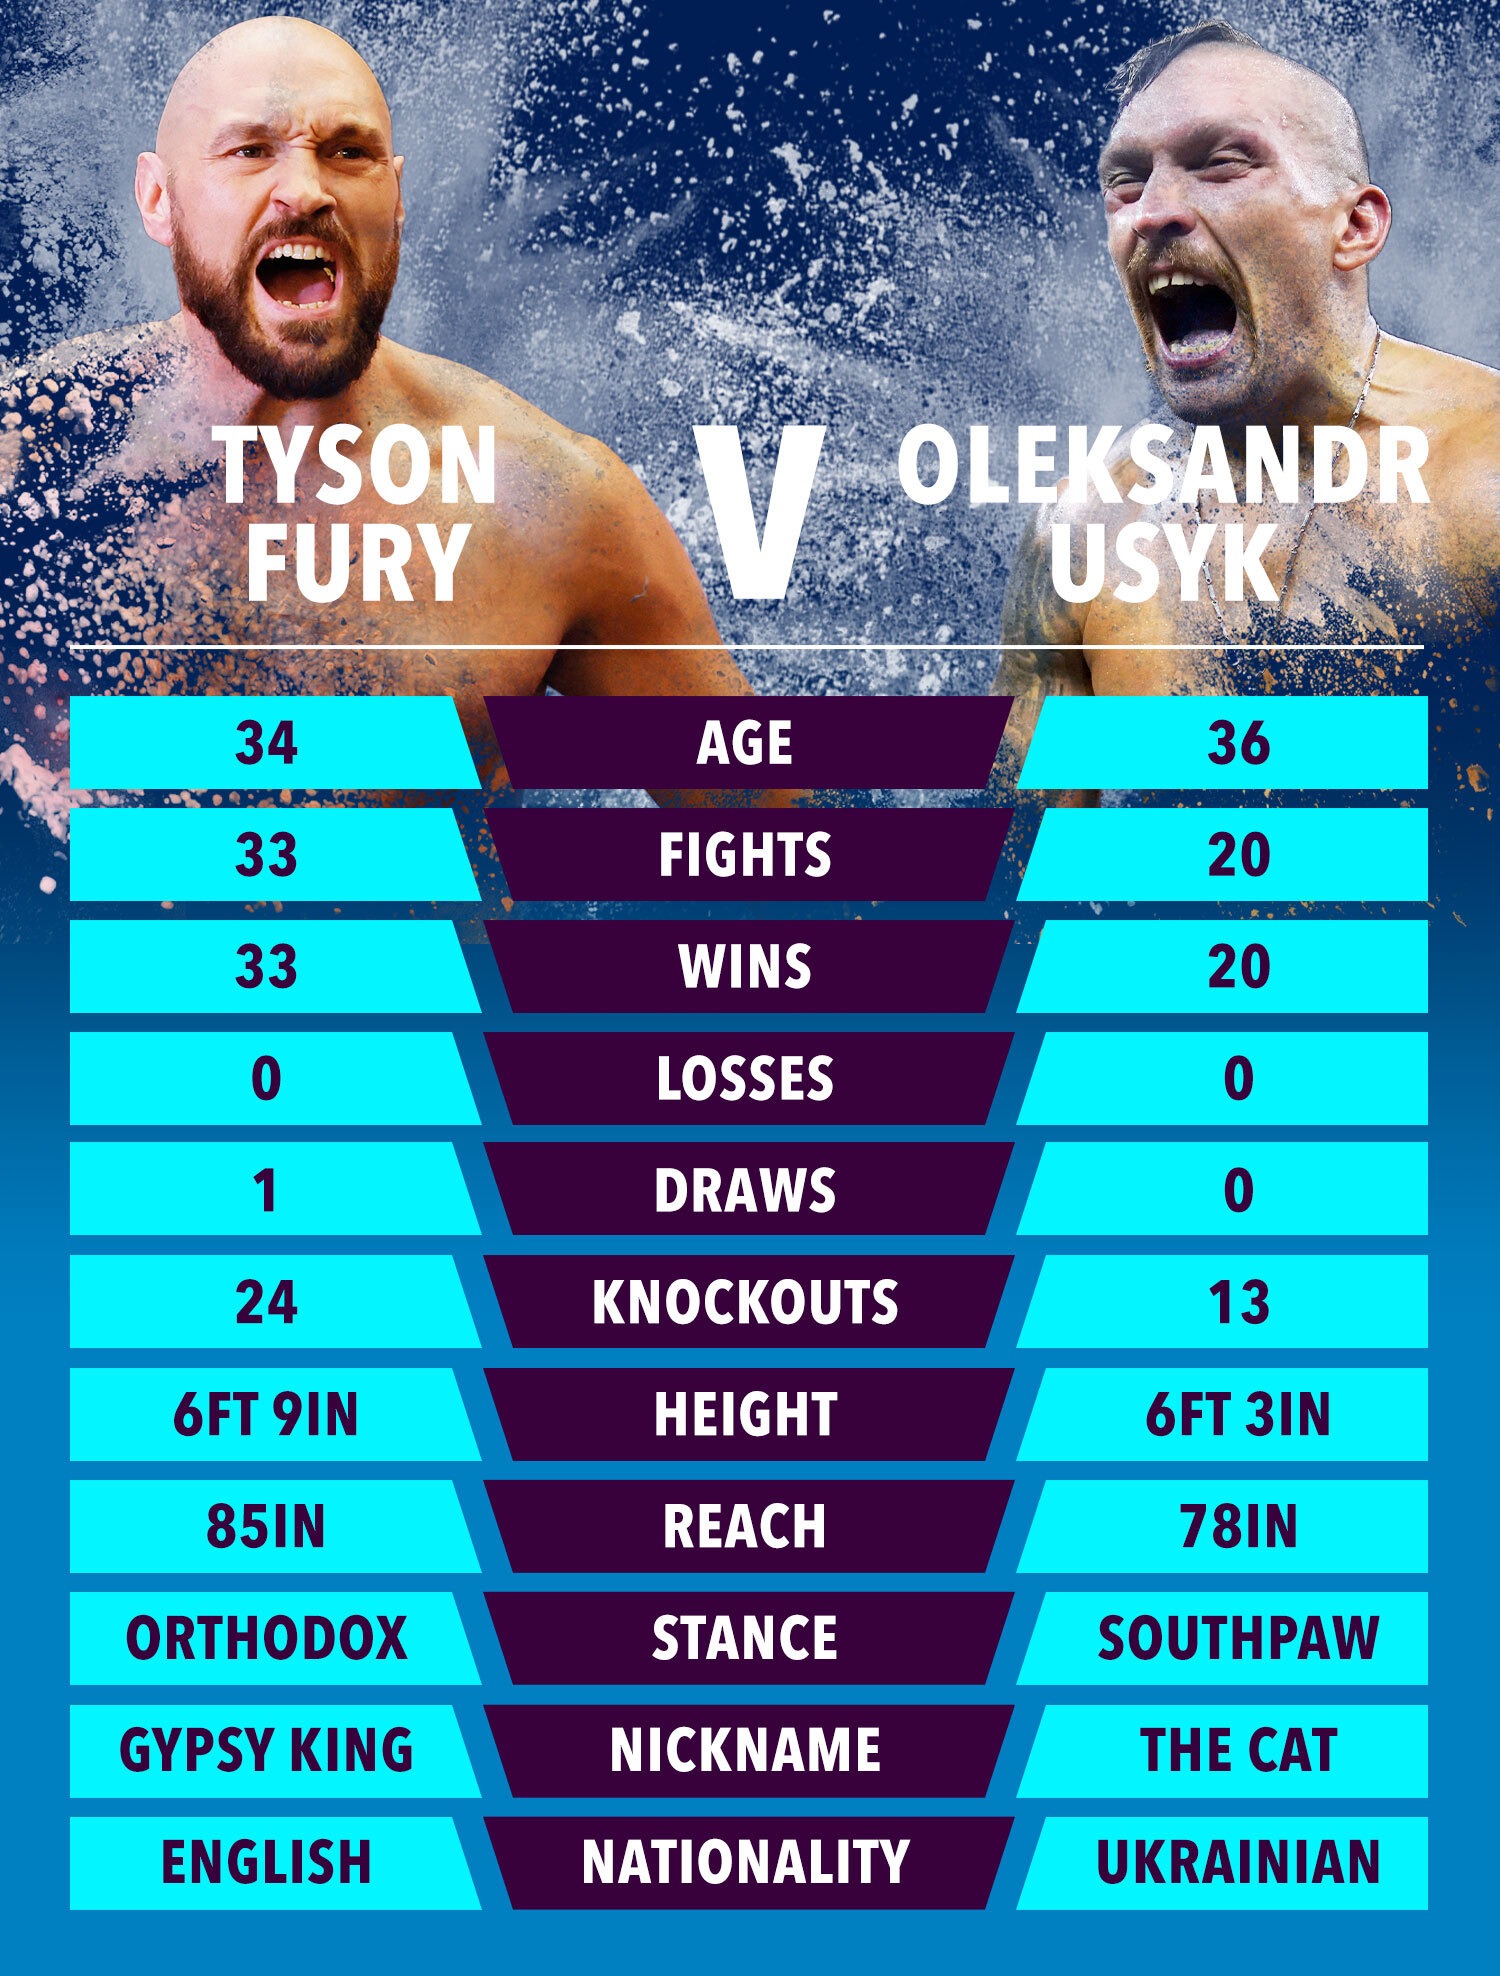 , Tyson Fury cries over love films and is completely different person to bad guy act, claims Oleksandr Usyk